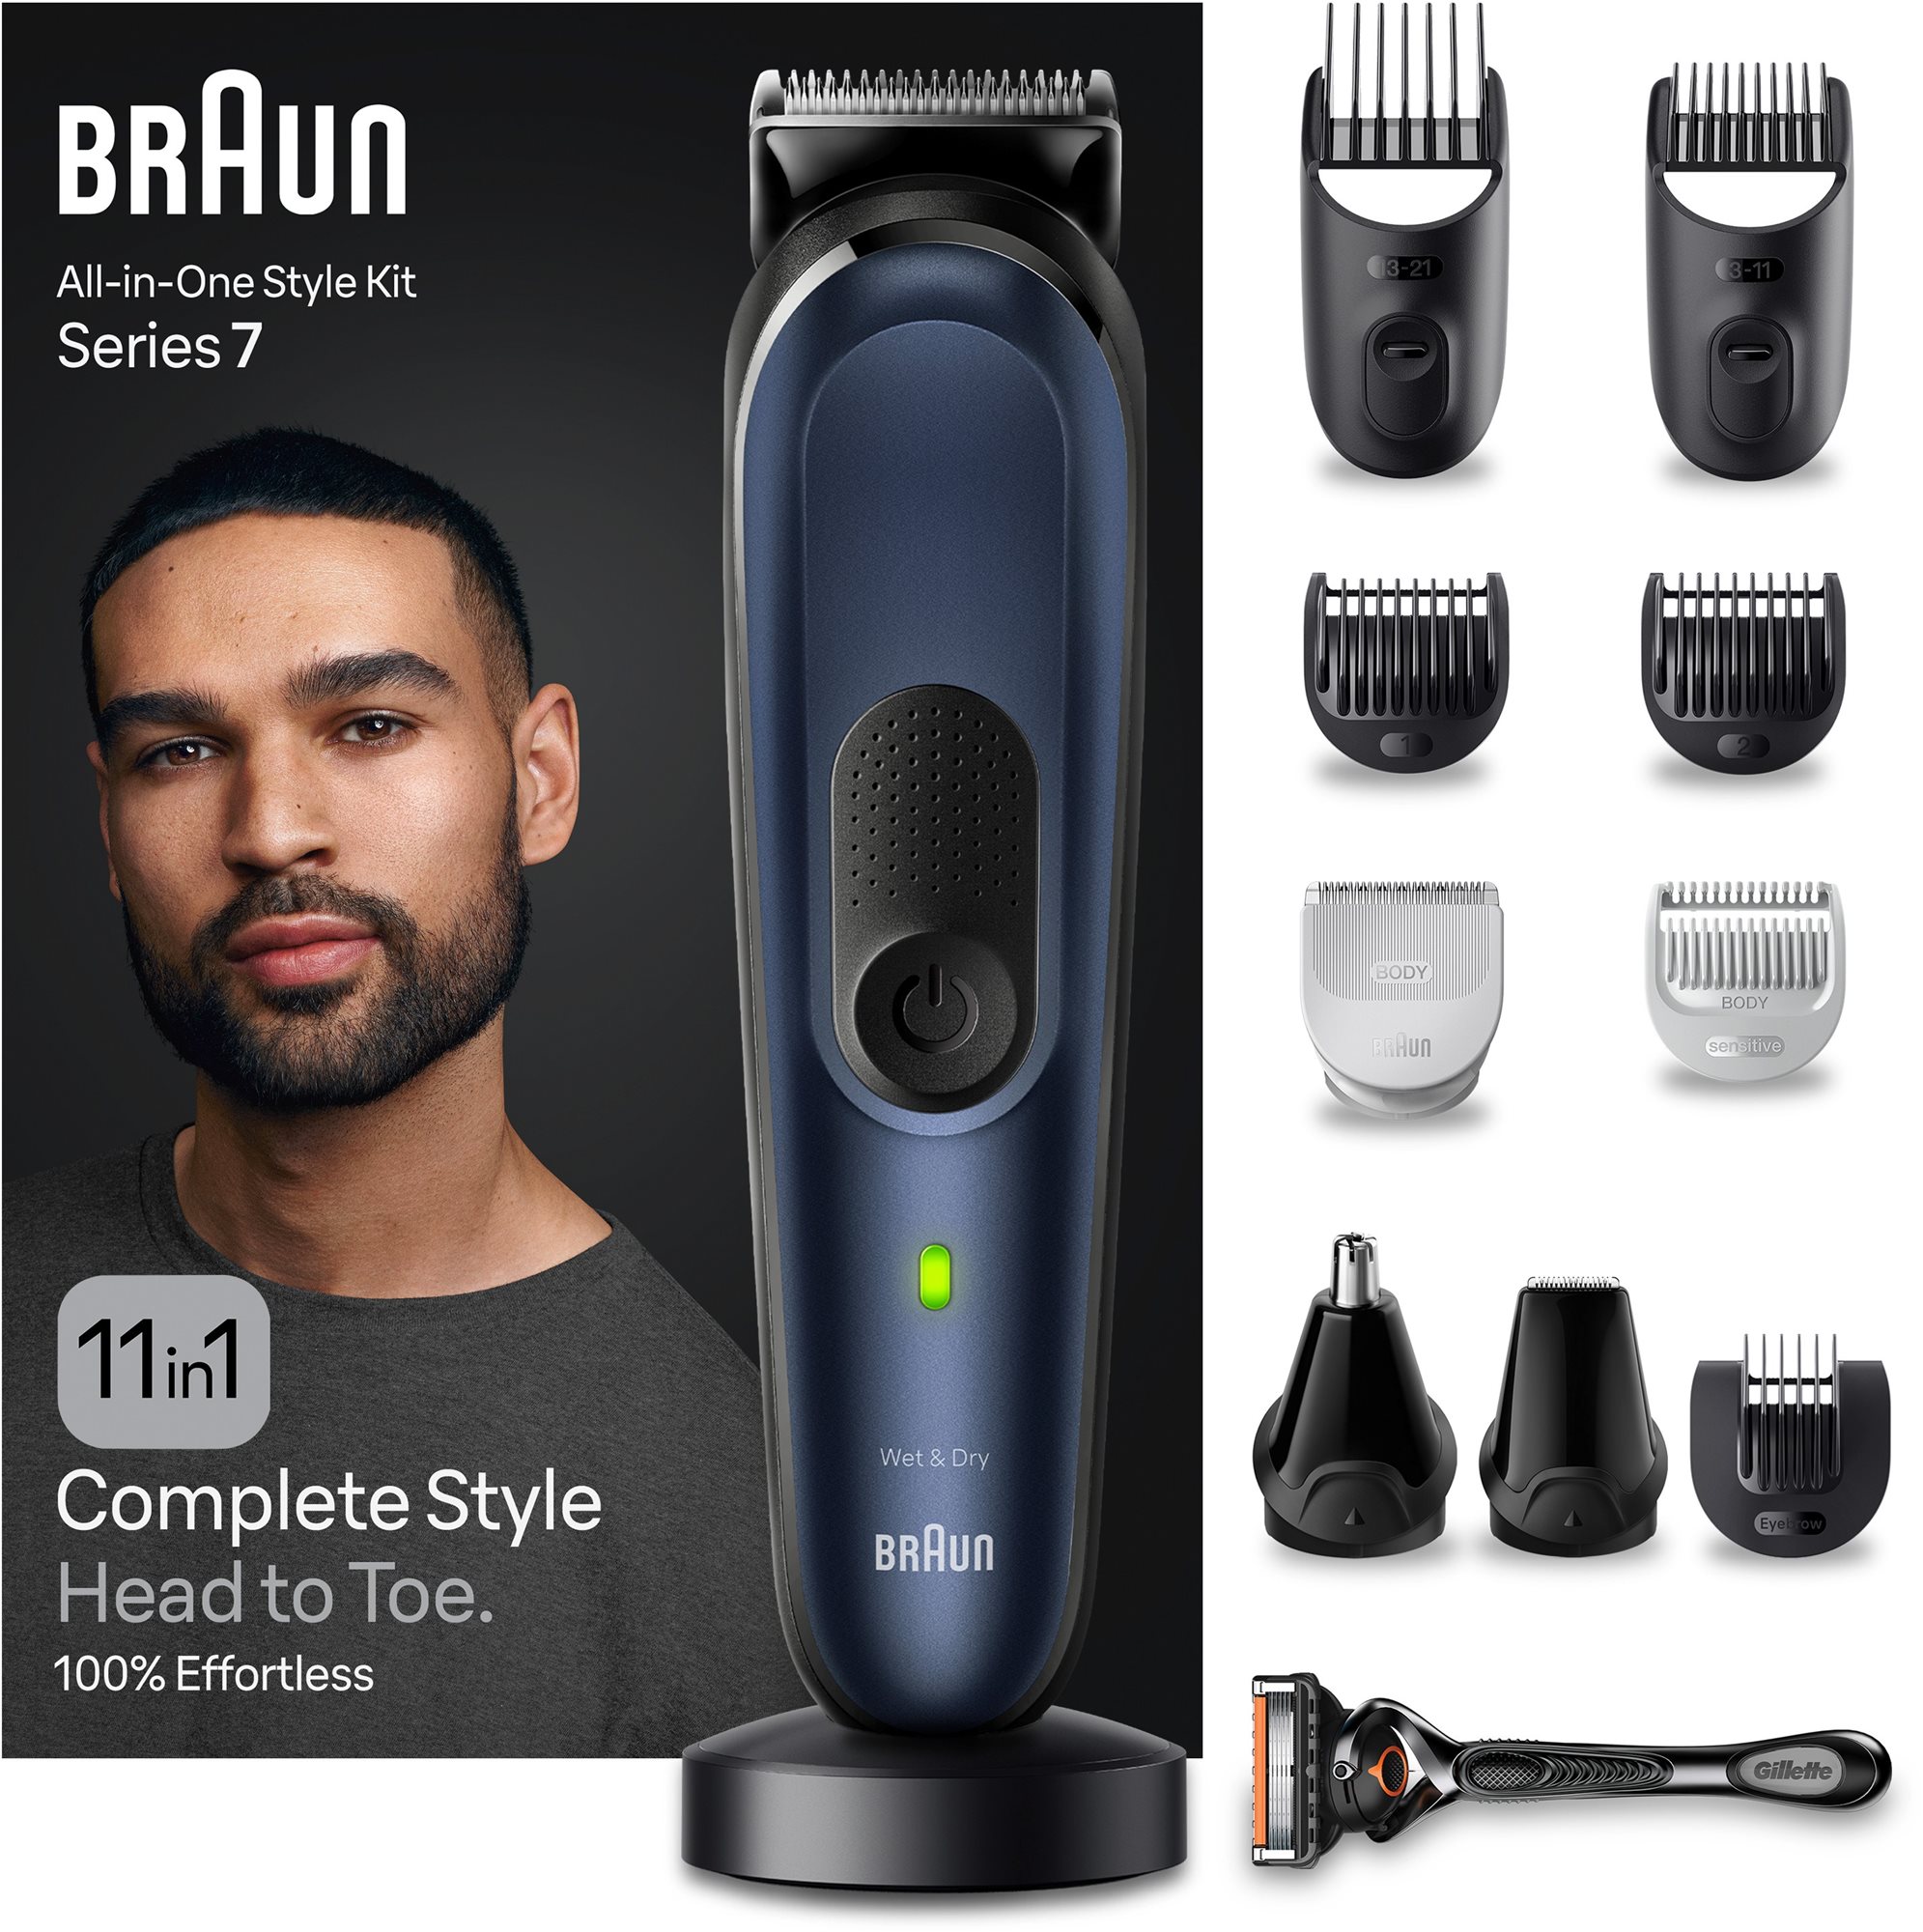 Braun All-In-One Series 7 MGK7440, 11in1